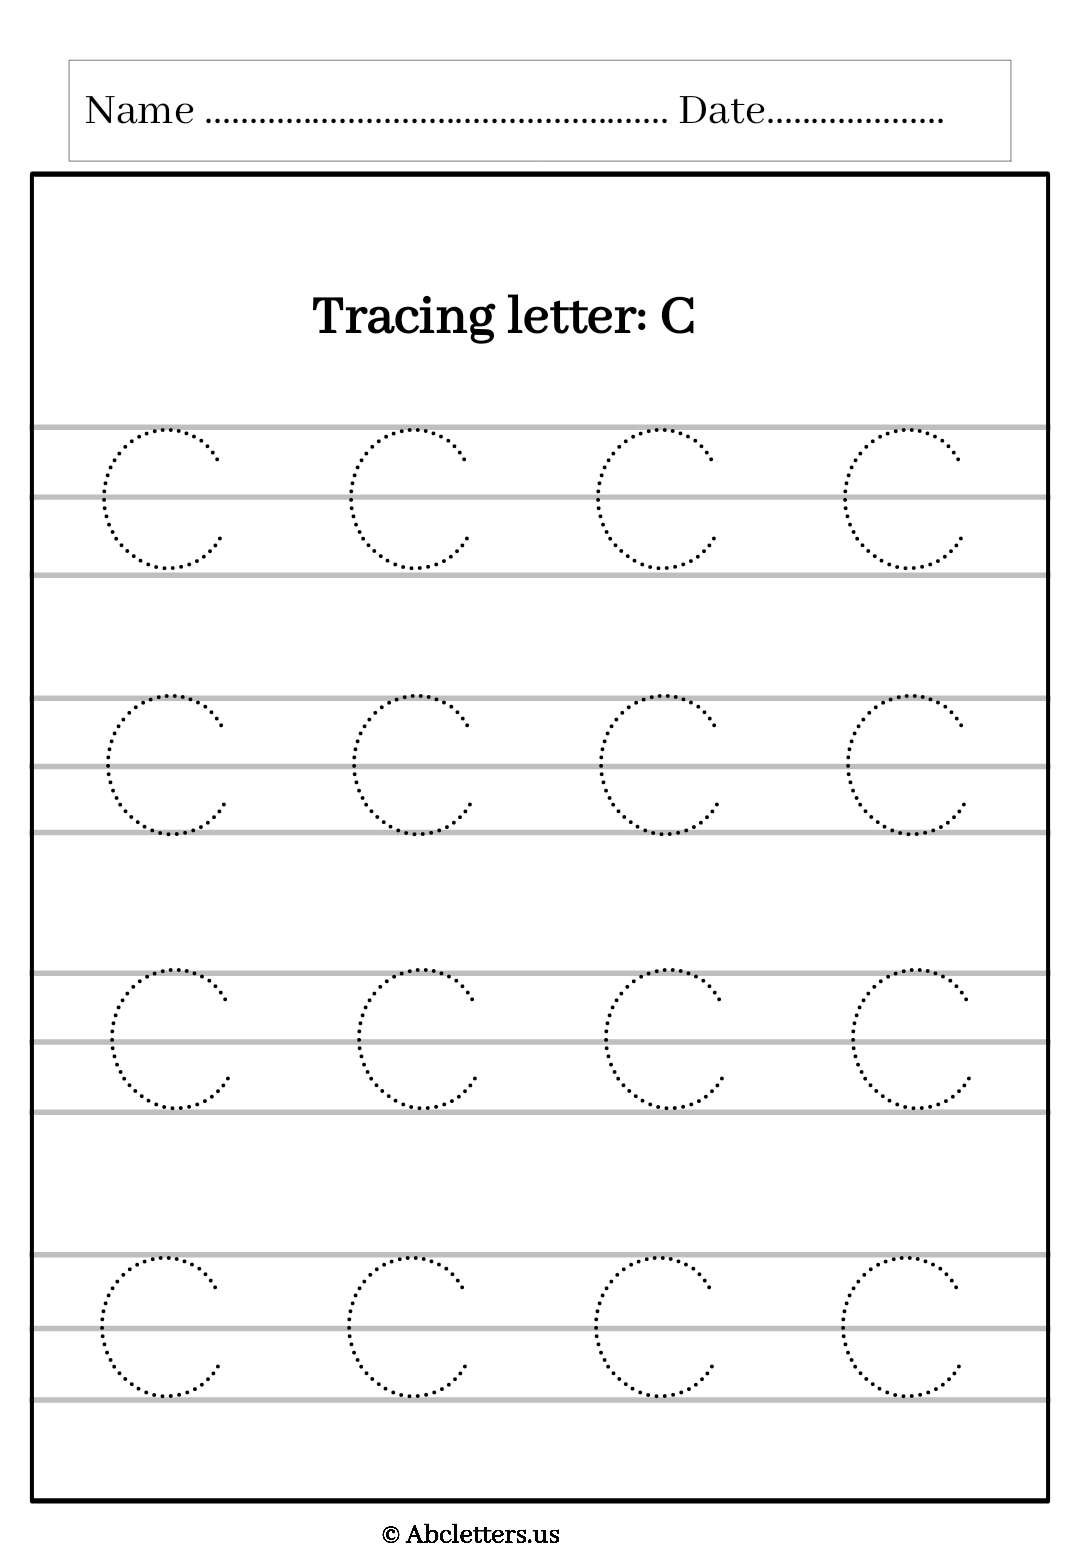 Tracing letter uppercase C with 3 lines